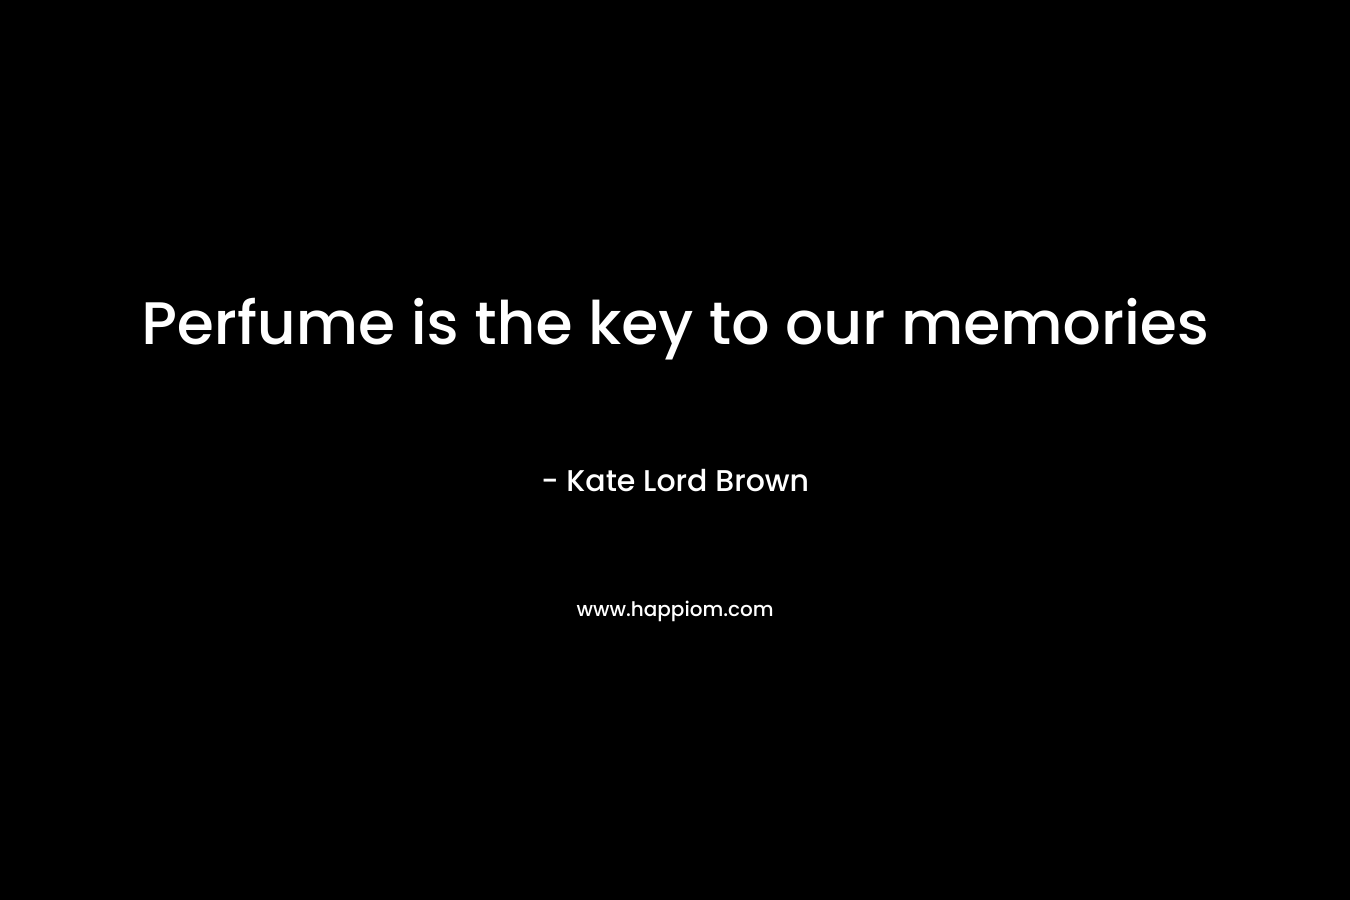 Perfume is the key to our memories